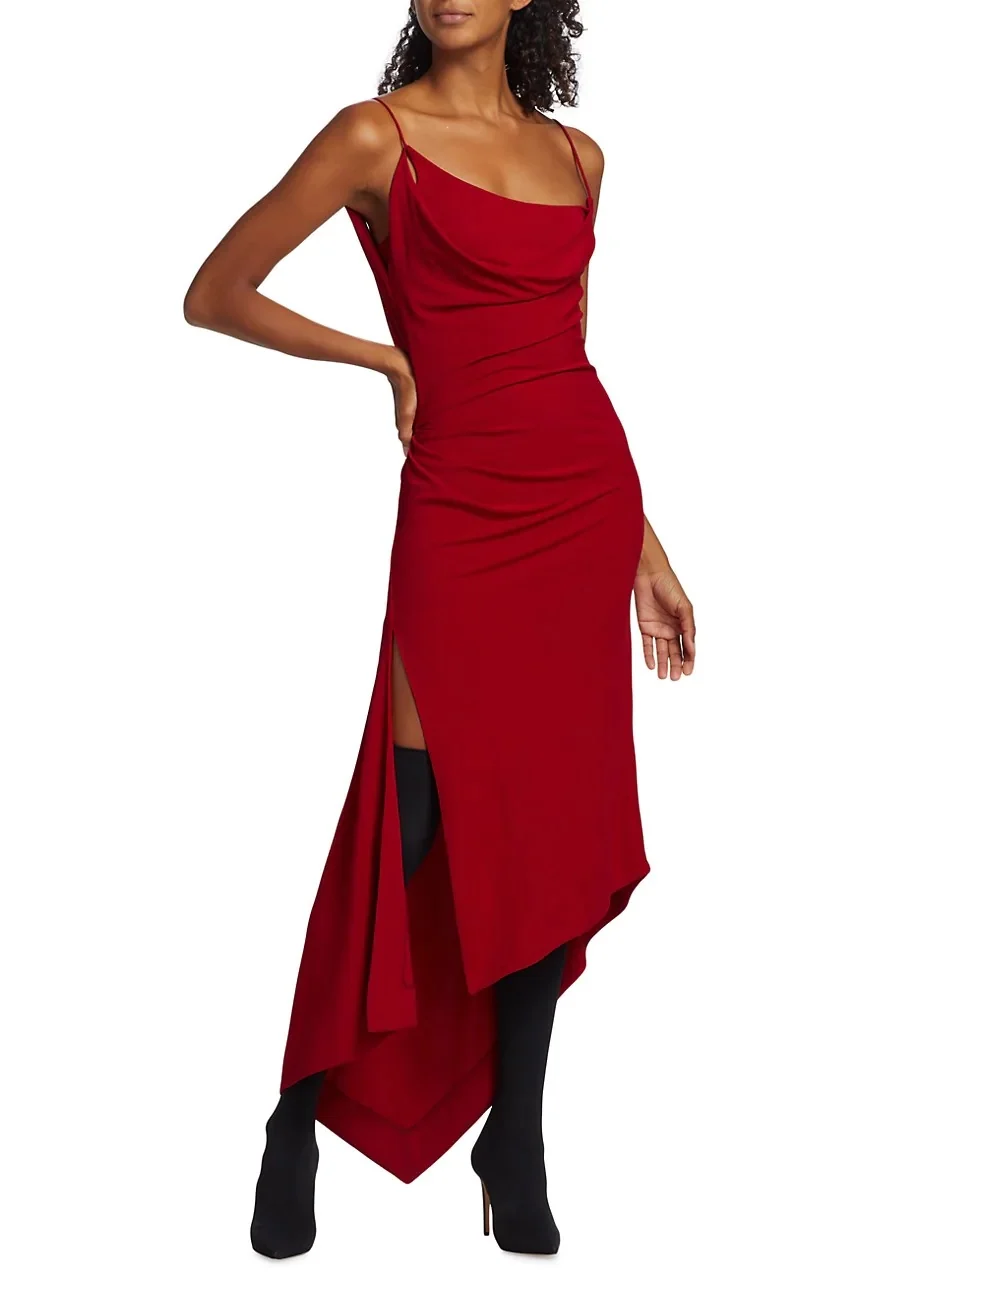 Women's Mid Calf Dress Solid Color Slim Backless Sleeveless Asymmetrical Hem Camisole Robe Sexy